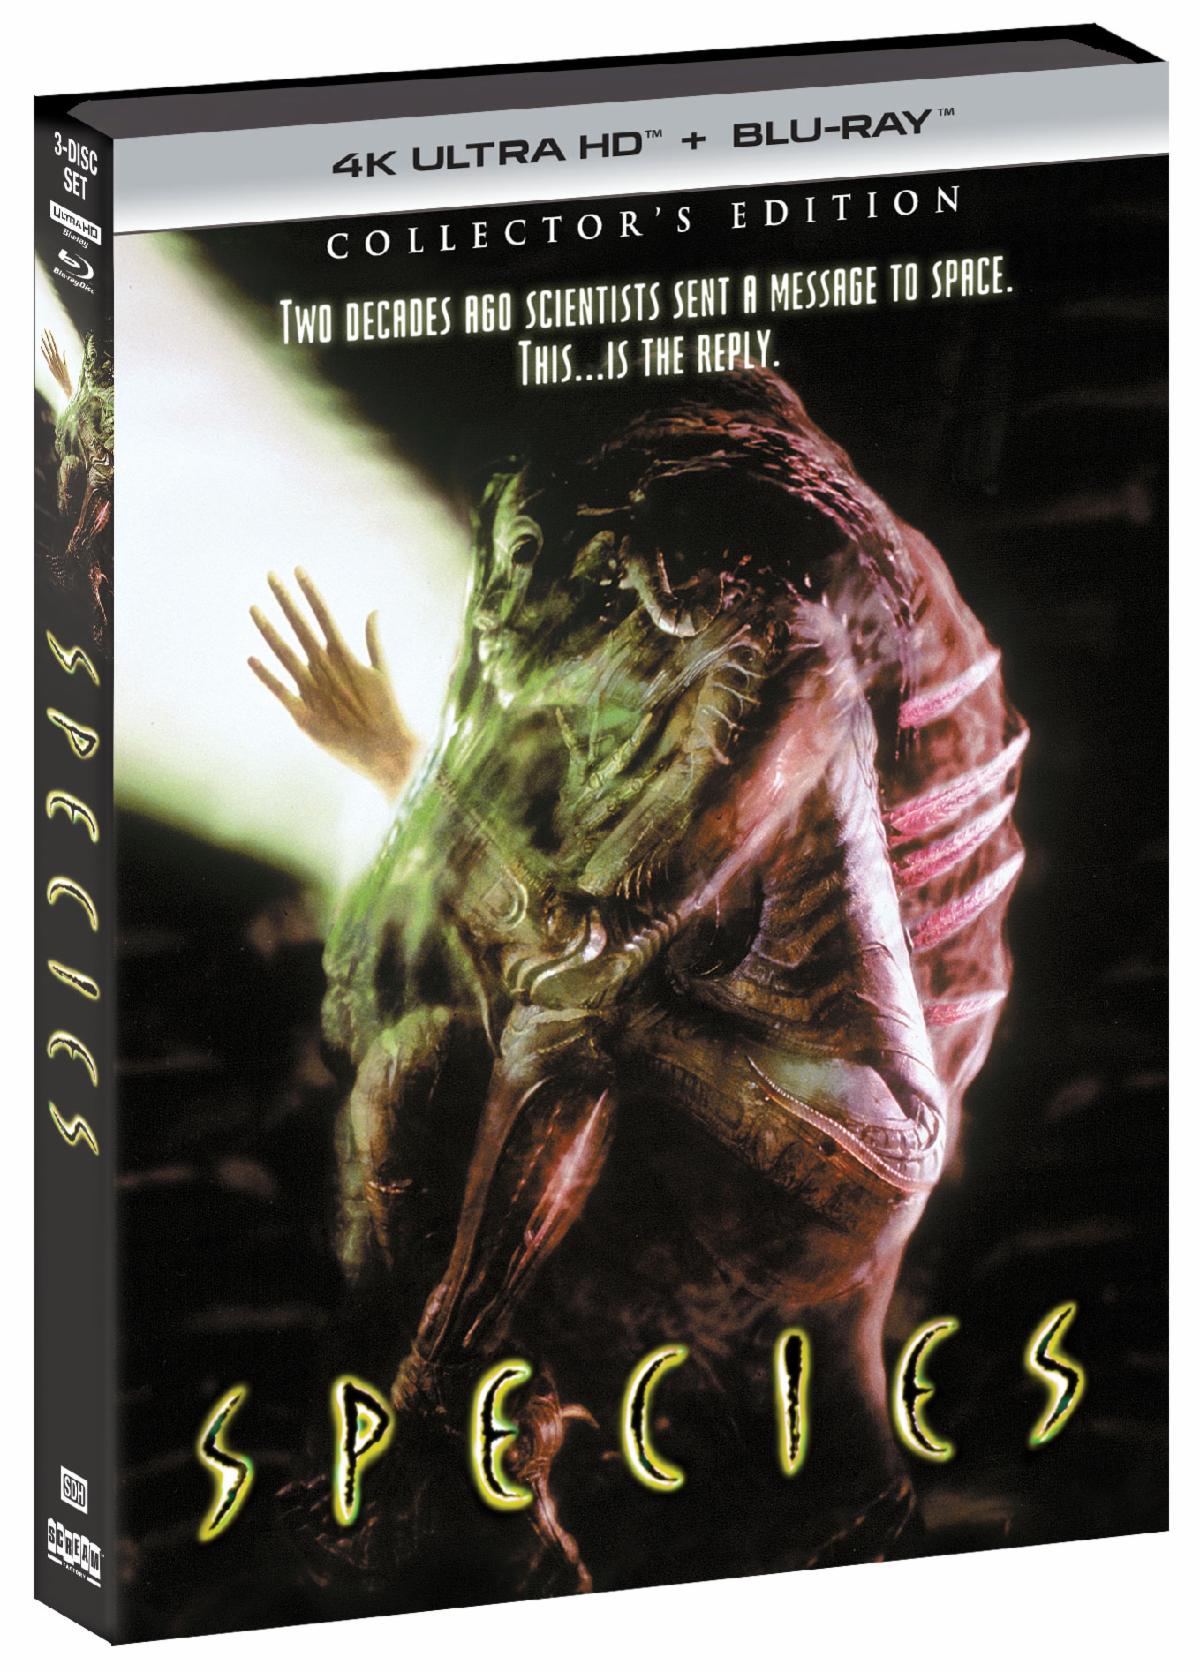 SPECIES Collector’s Edition 4KUHD + Blu-ray Combo Pack